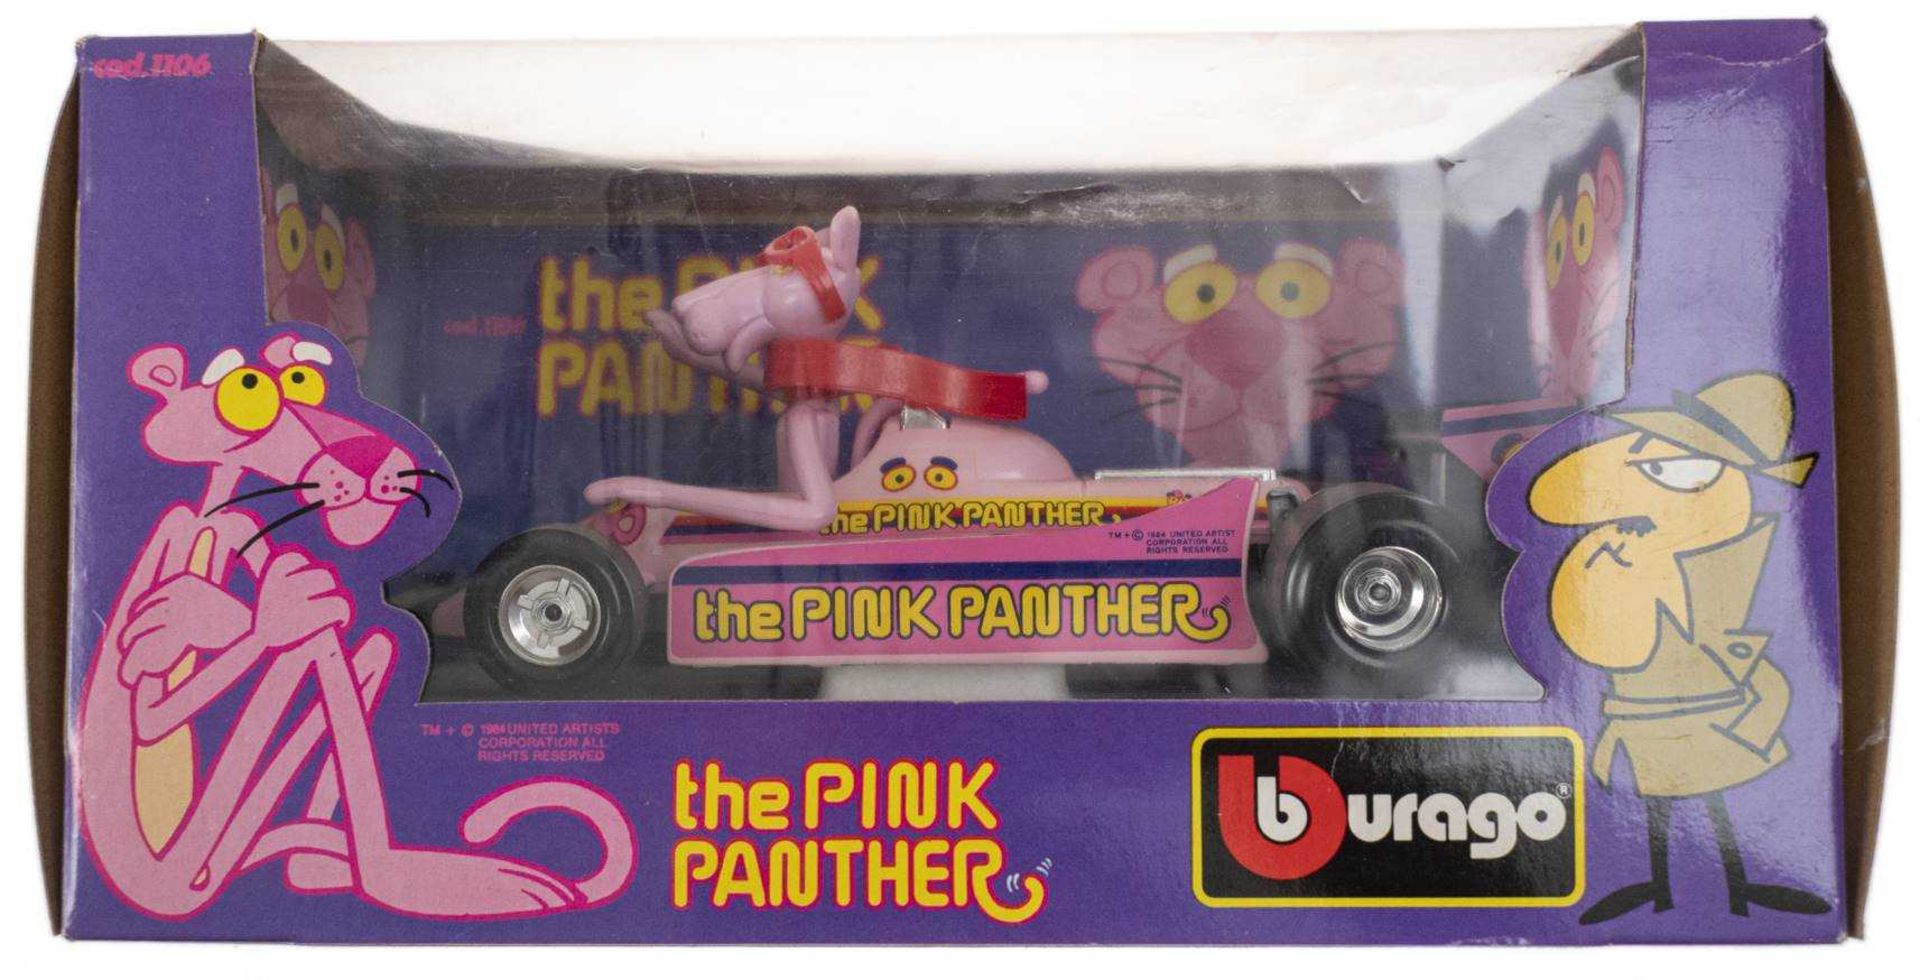 THE hot pink panther, model perfect in partly slightly faded, dusted original packaging